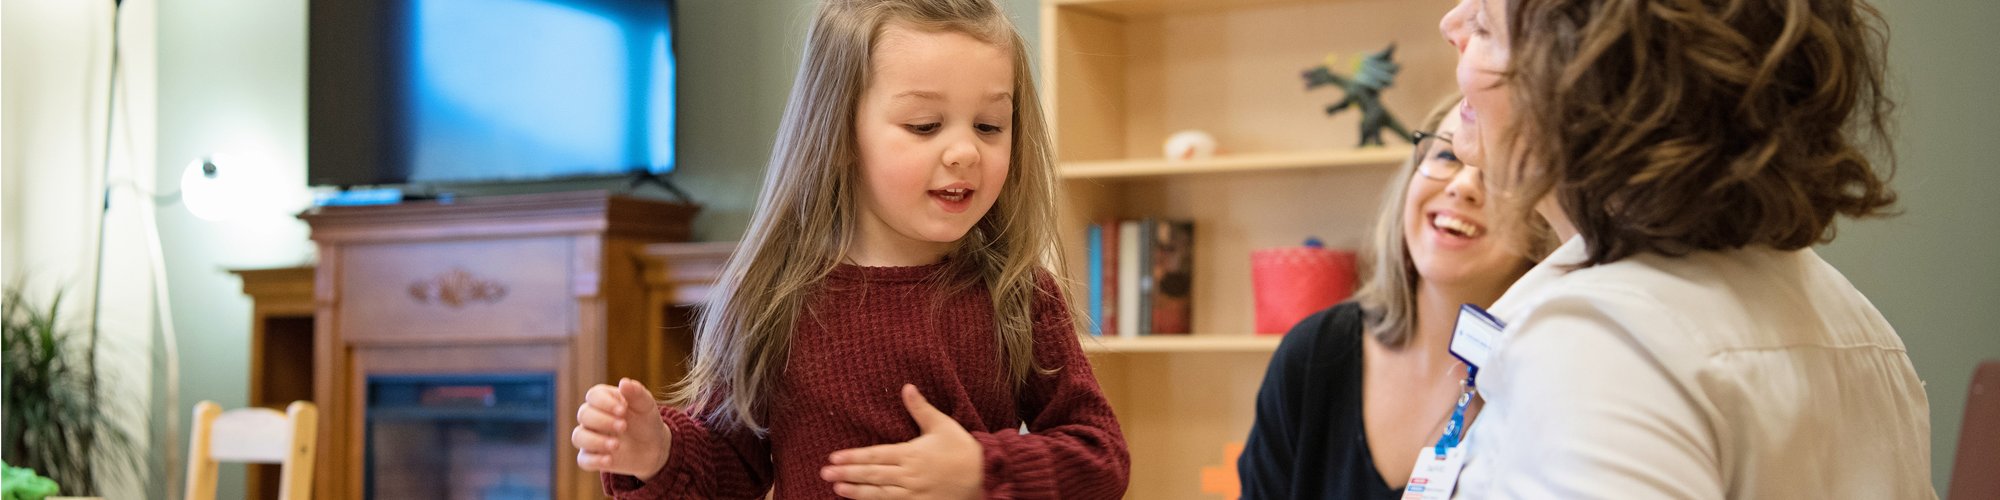 A child signs "please" as she learns communication skills in therapy.